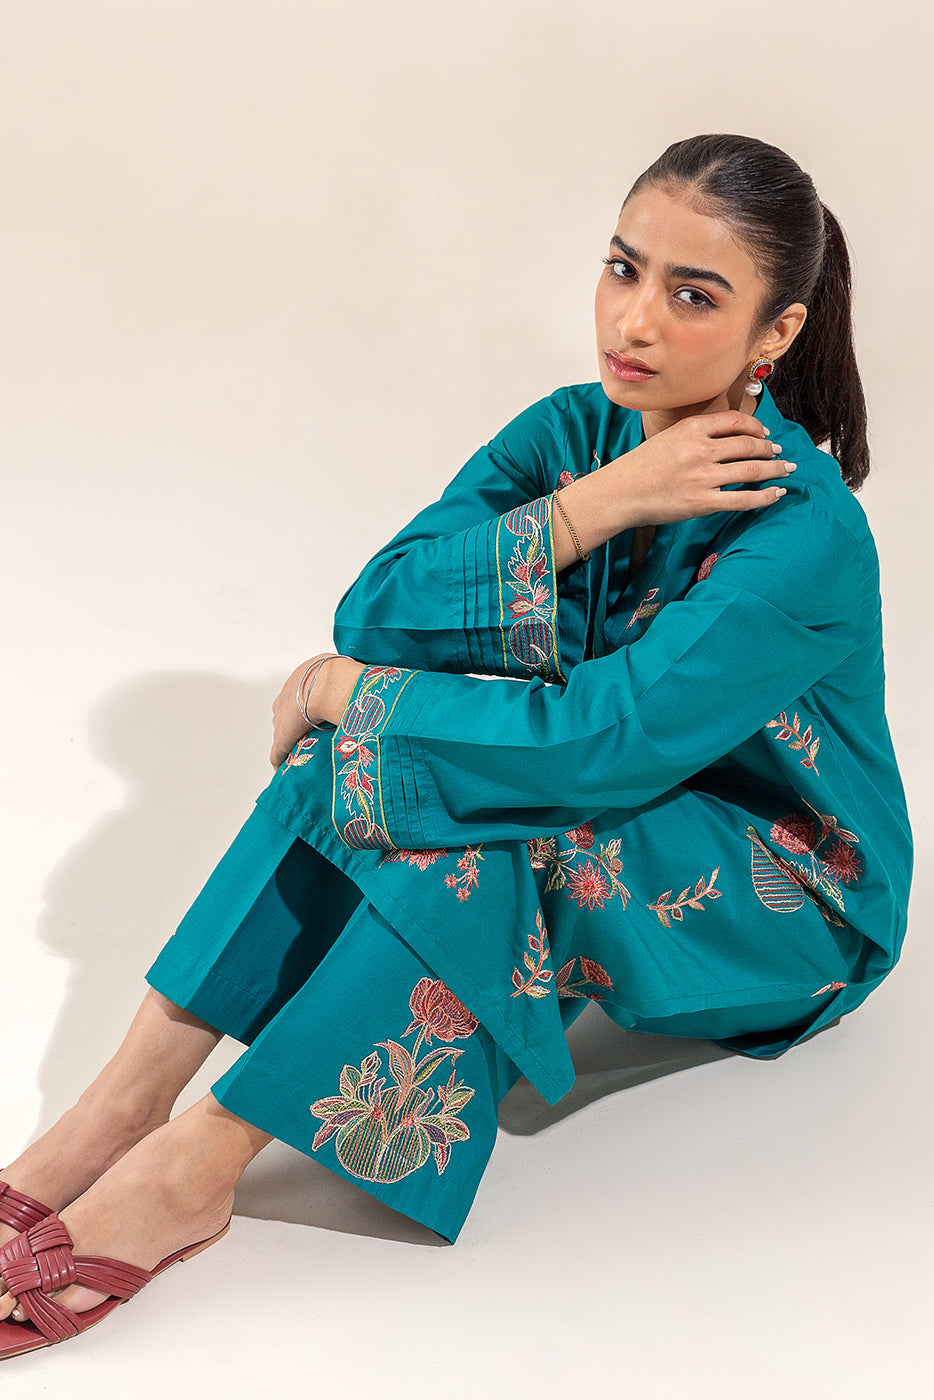 2 PIECE EMBROIDERED LAWN SUIT-CRYSTAL LAKE (UNSTITCHED) - BEECHTREE